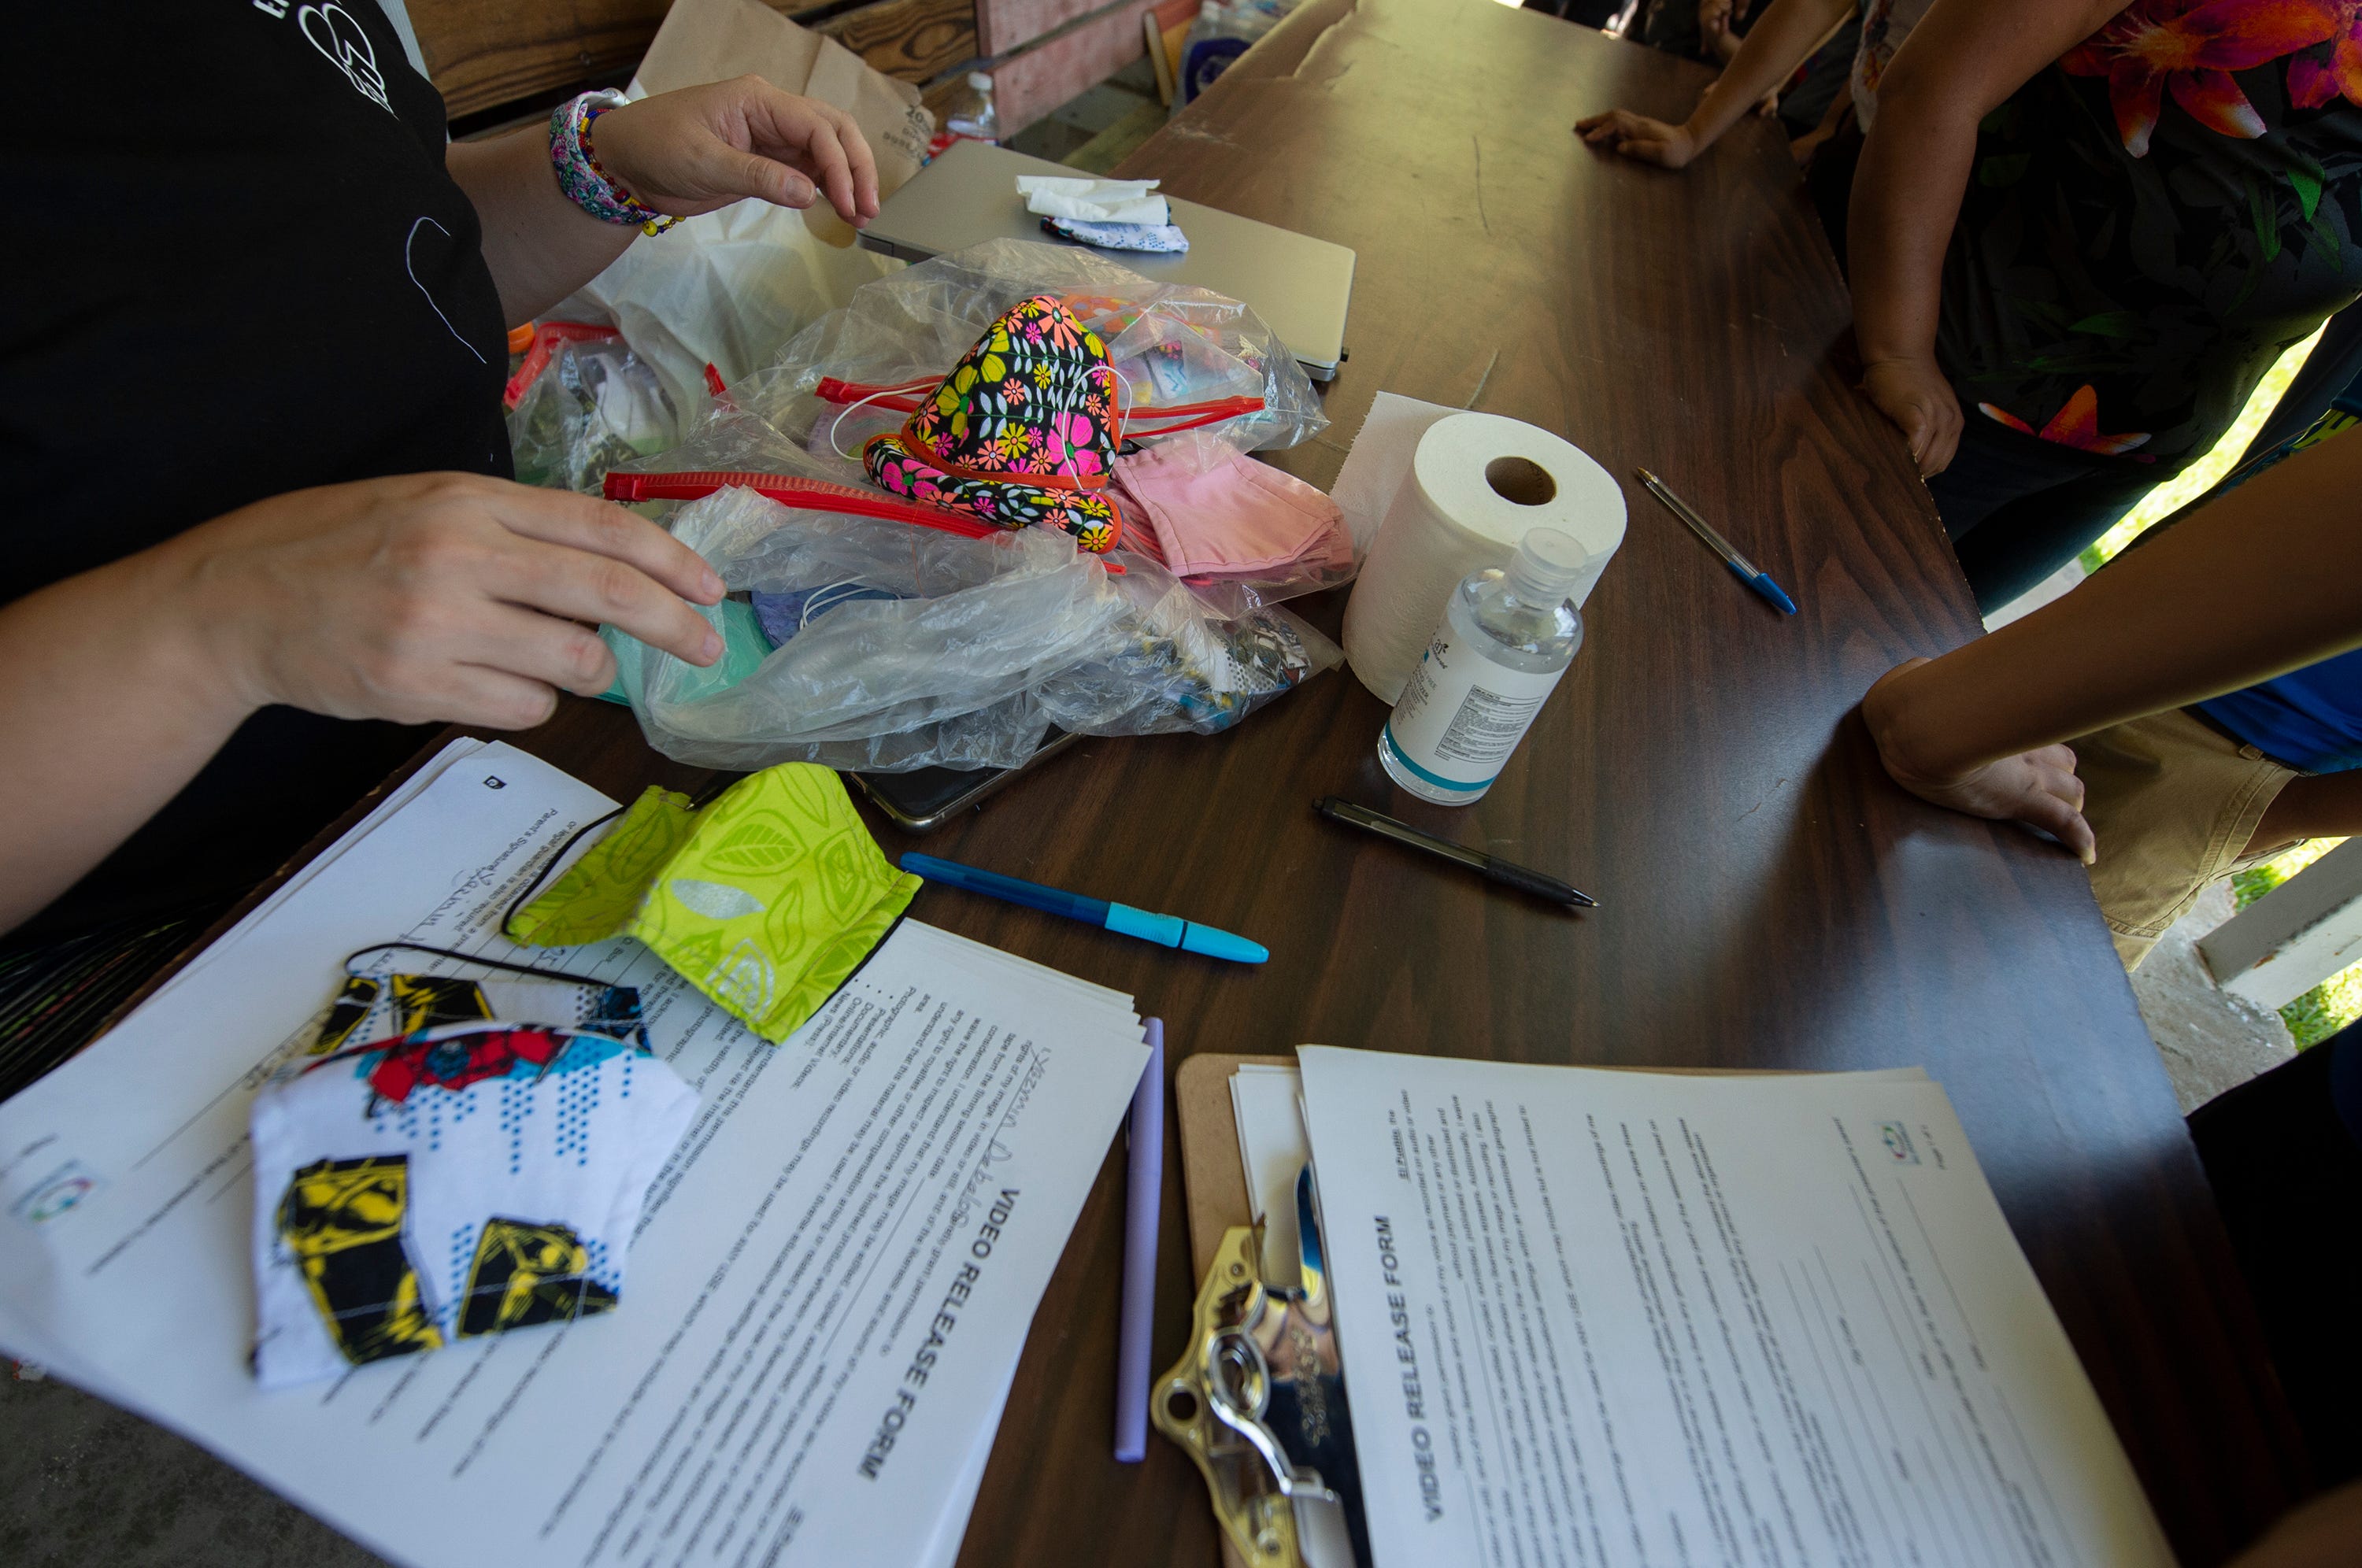 El Pueblo, a nonprofit specializing in immigration legal services, provides masks and hand sanitizer for people at a school supply distribution event in Forest, Miss., on July 11, 2020. In August 2019, the Latino community in Forest was hit hard by ICE raids at local poultry plants.